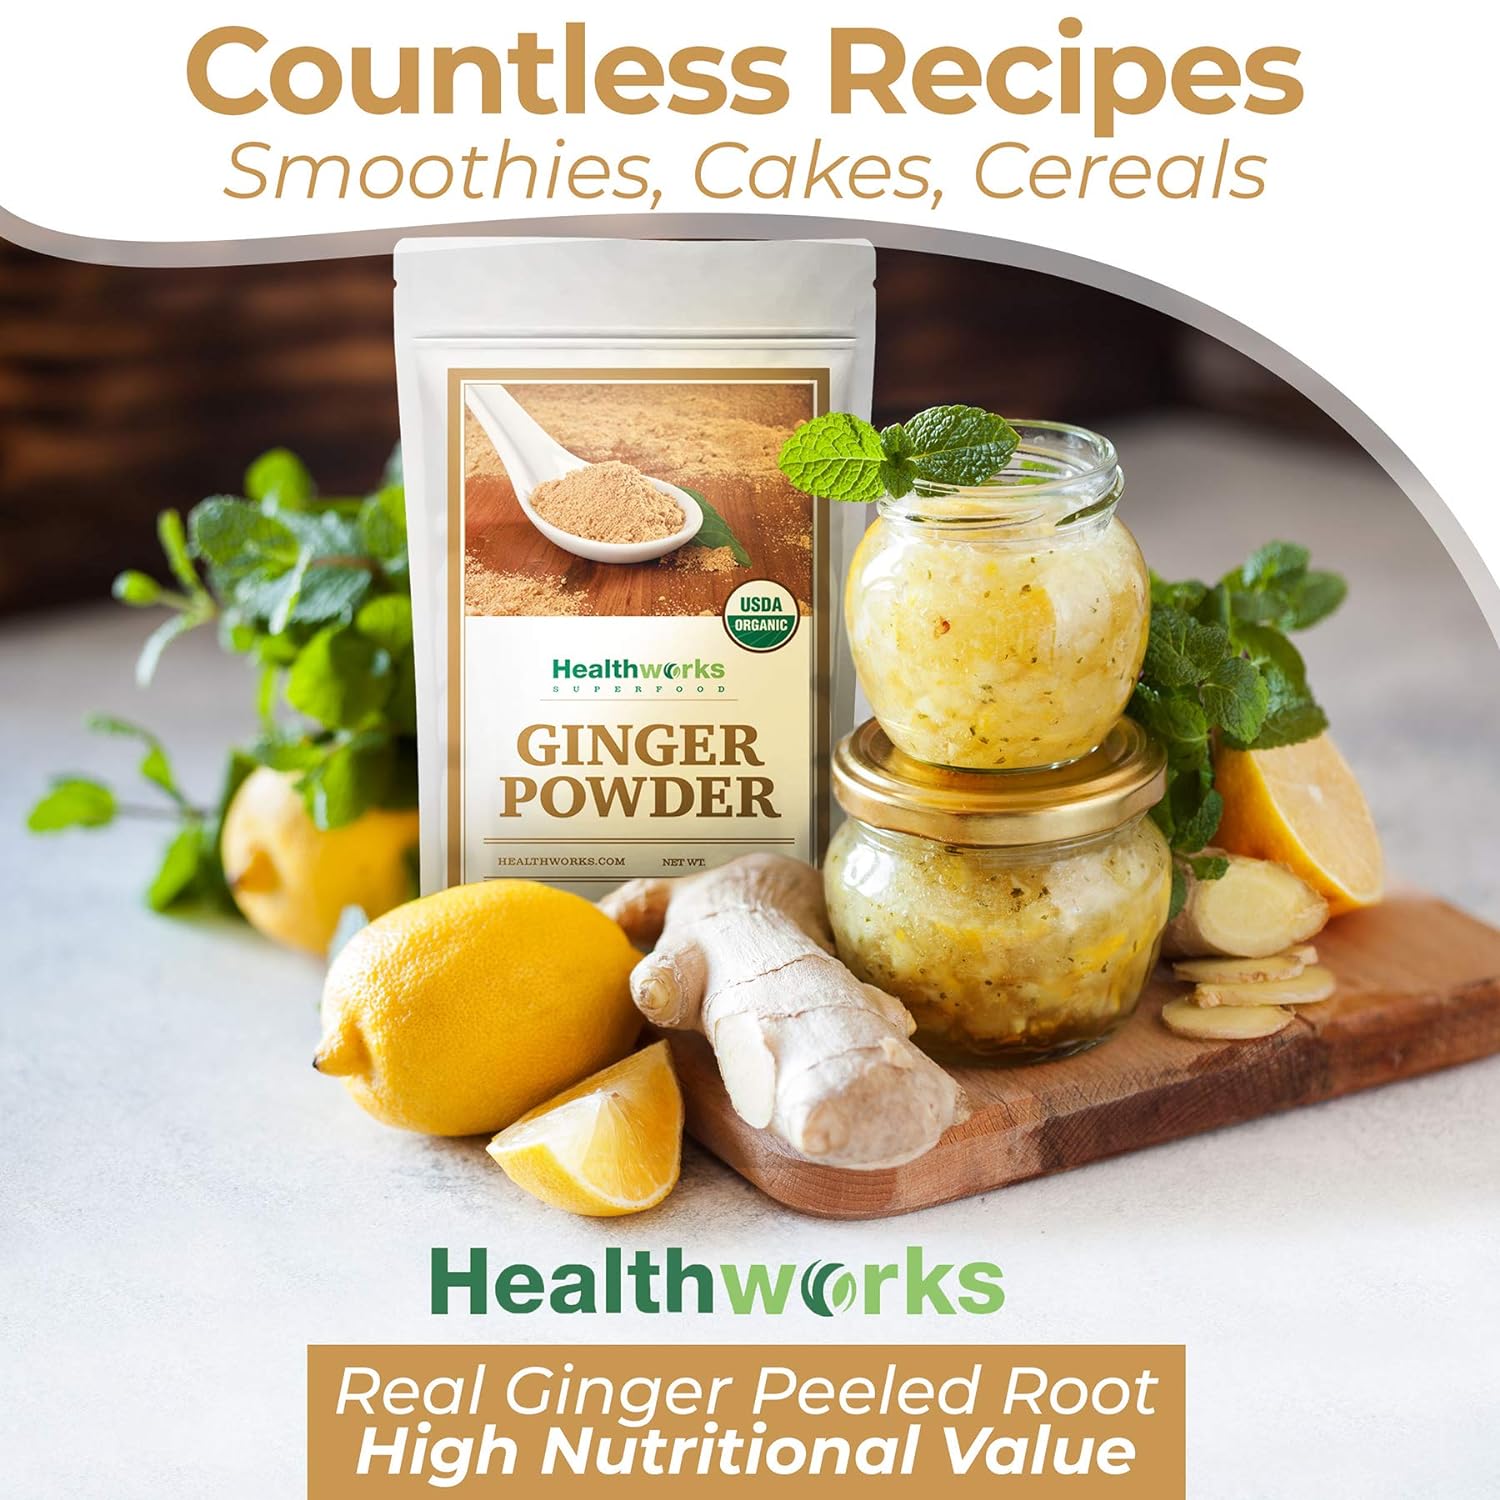 Healthworks Ginger Powder (8 Ounces) | Ground | Raw | All-Natural & Certified Organic | Keto, Vegan & Non-GMO | Great with Coffee, Tea & Juices | Antioxidant Superfood/Spice